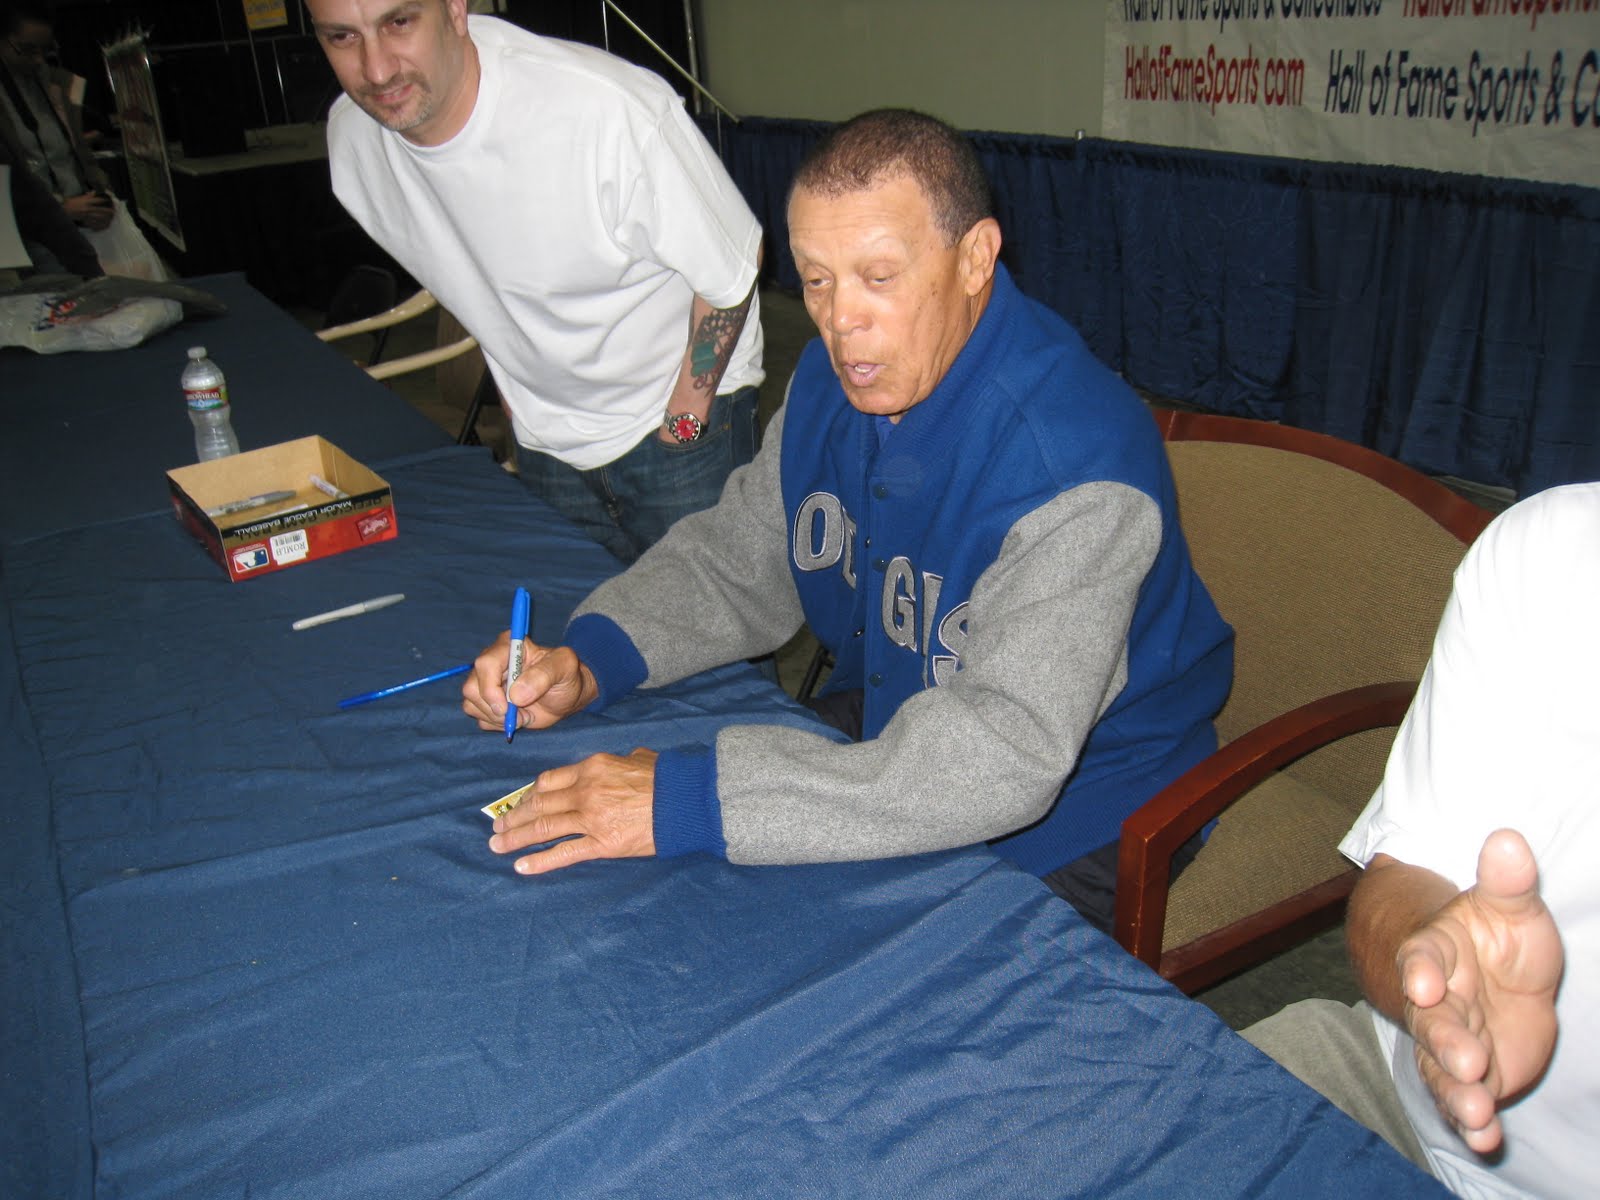 My Autograph Signings: Maury Wills Autograph Signing & Evander Holyfield Photo Op1600 x 1200